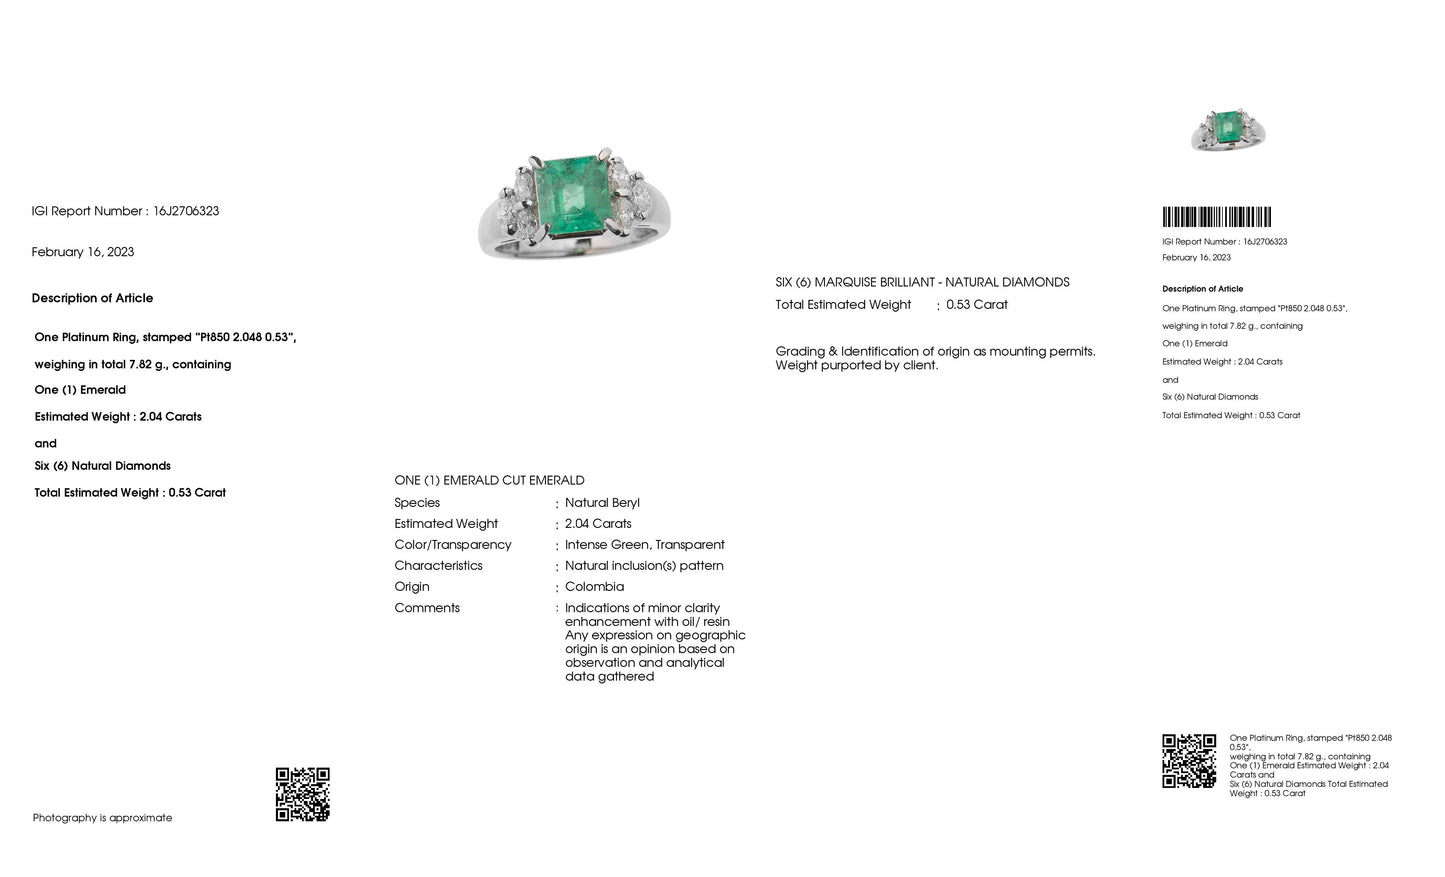 2.04ct NATURAL COLOMBIA EMERALD and 0.53ct NATURAL DIAMONDS set with Platinum Ring - SALE